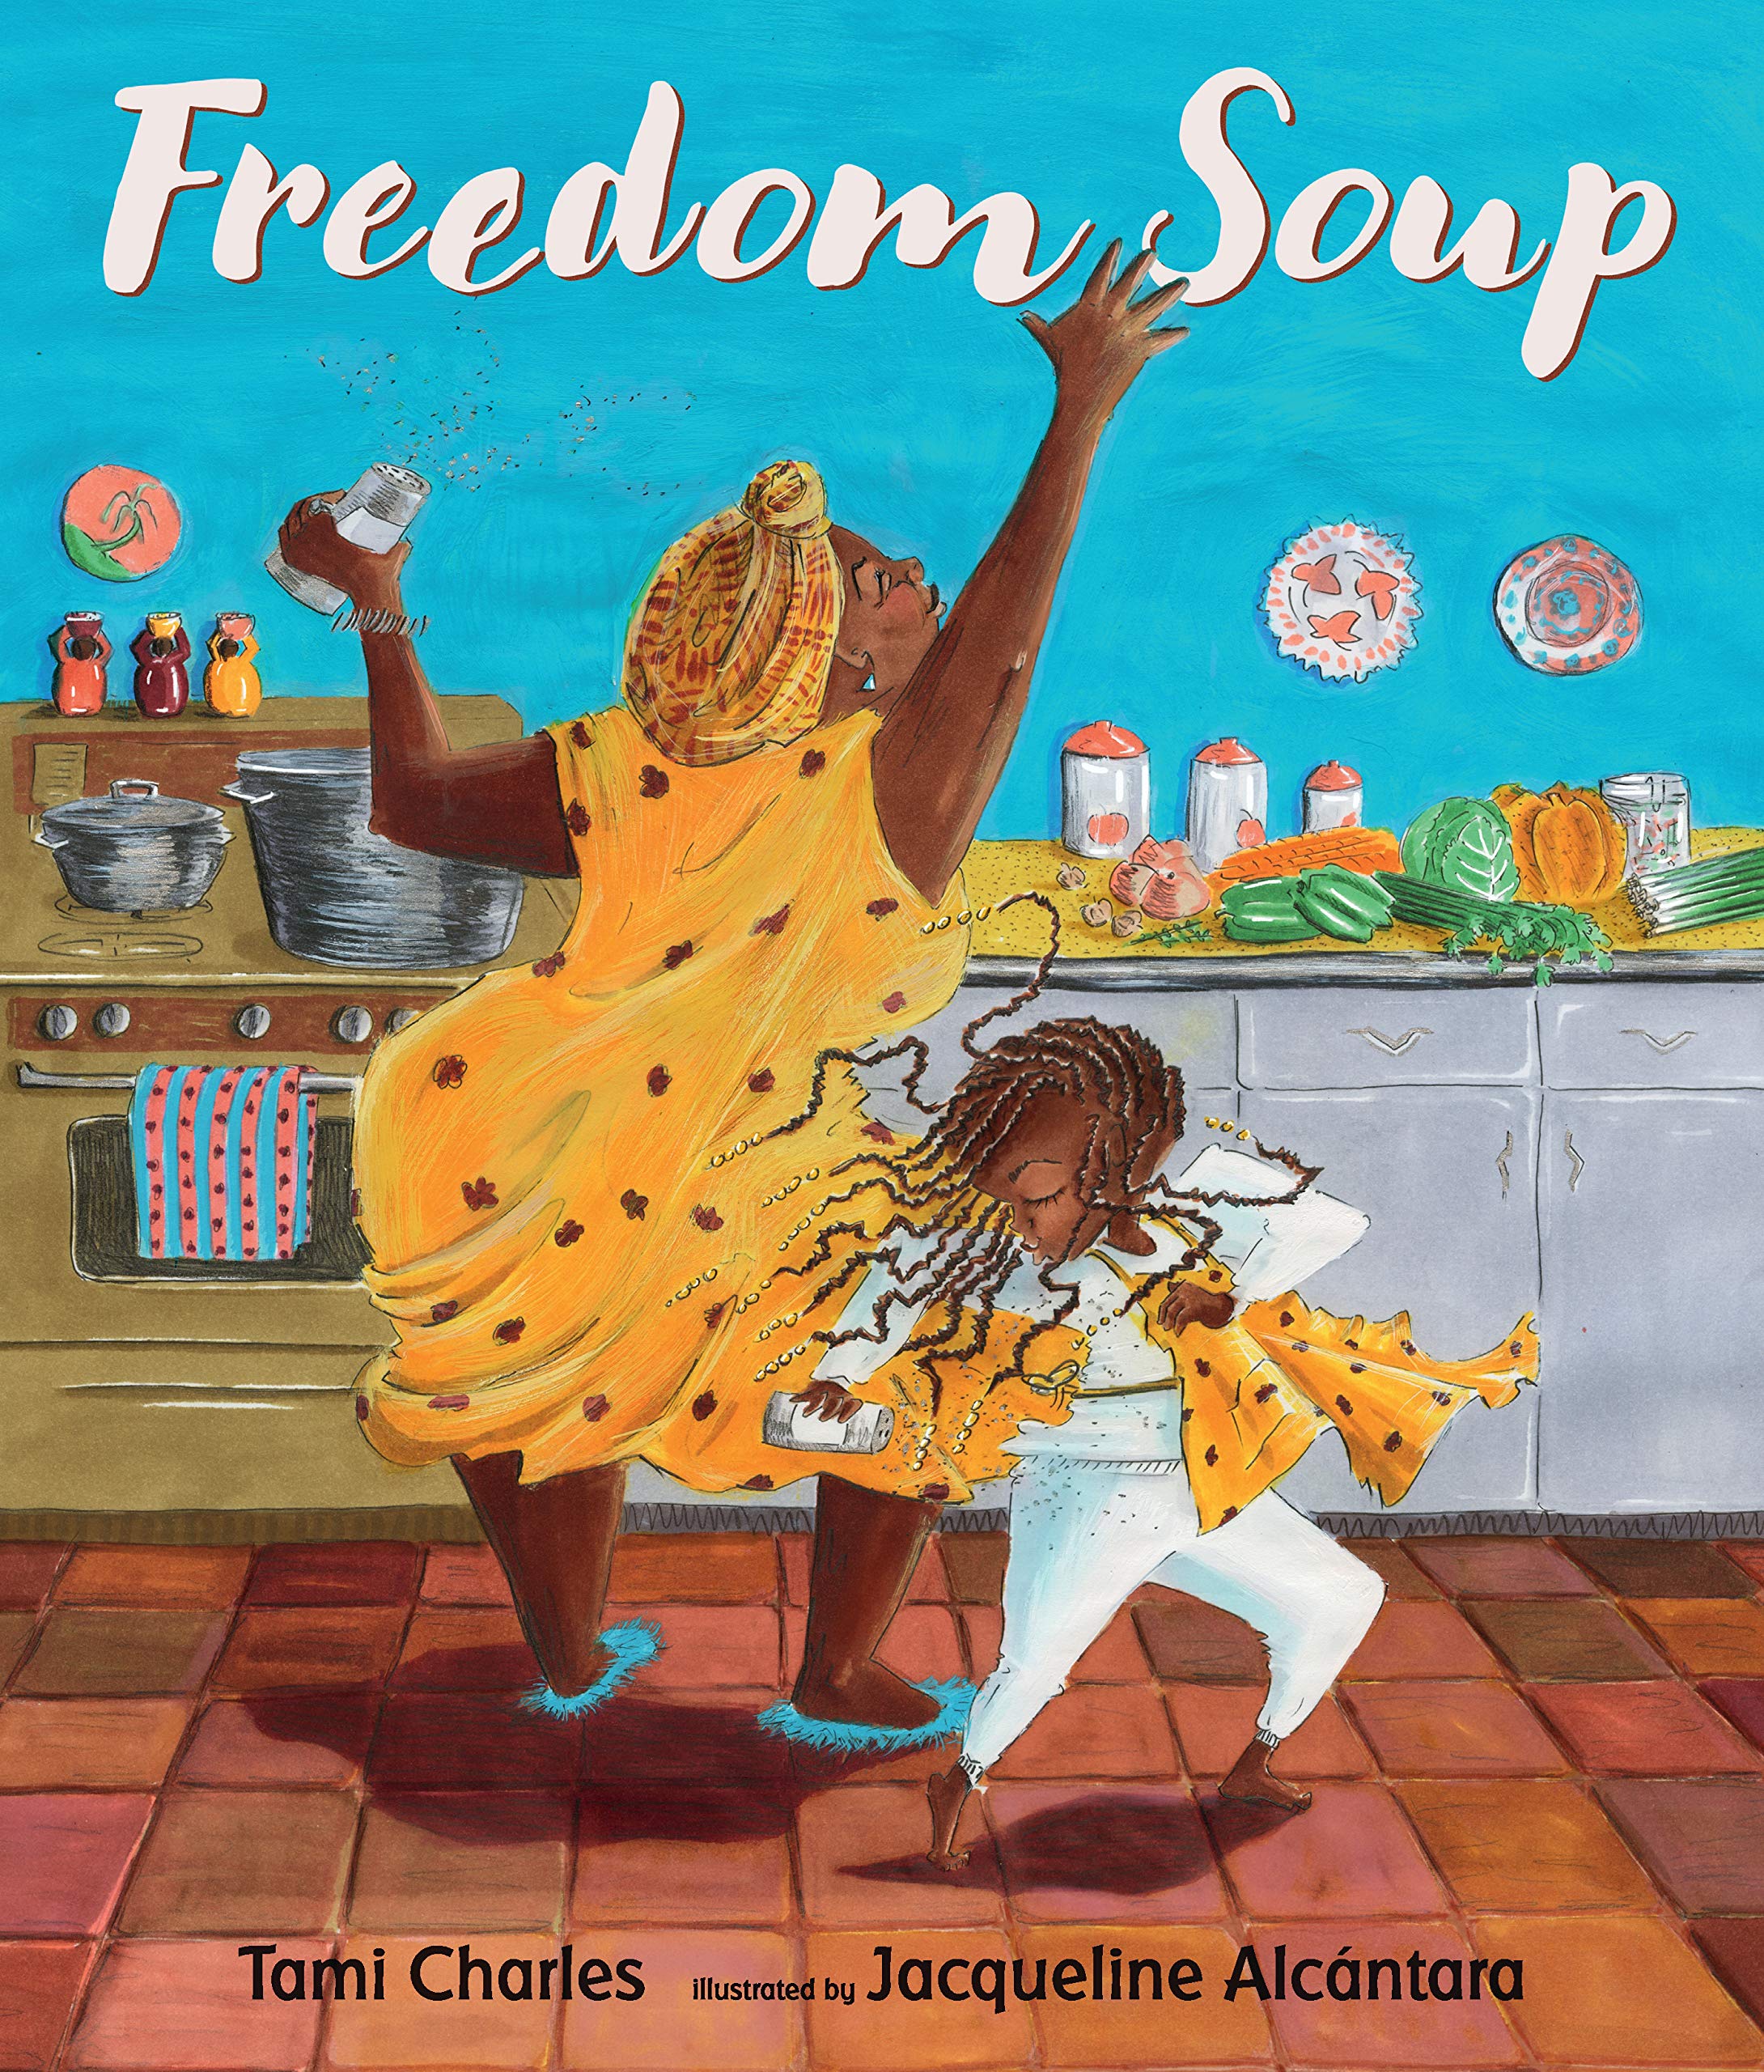 Freedom Soup, by Tami Charles